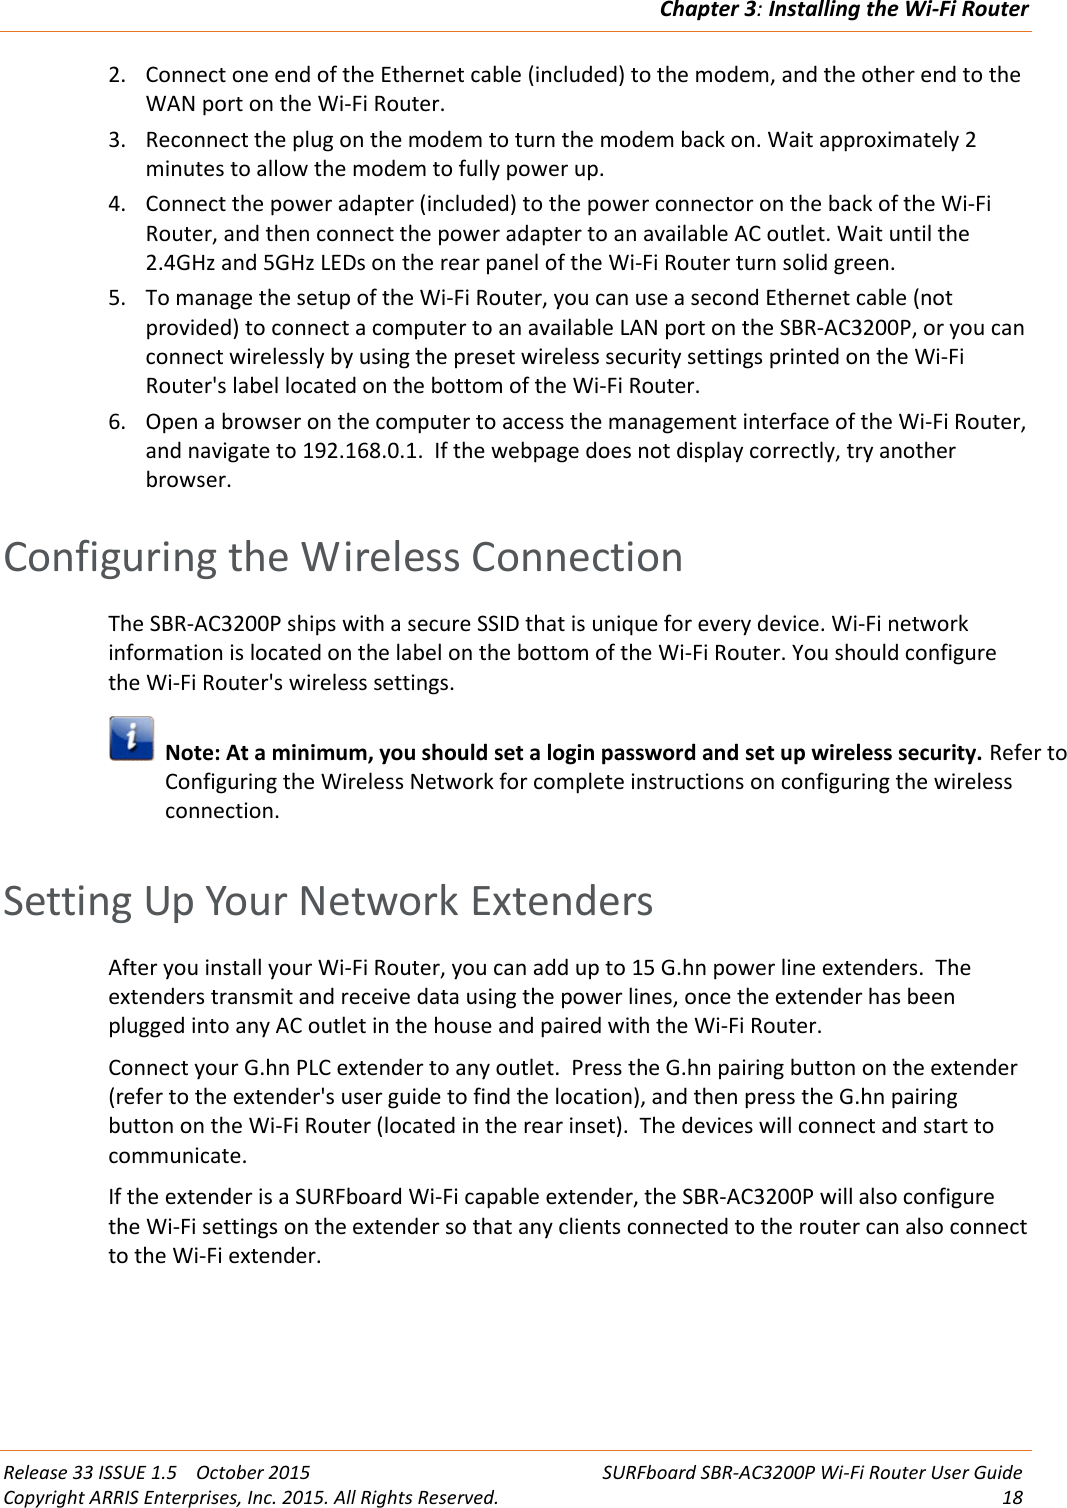 Chapter 3:Installing the Wi-Fi RouterRelease 33 ISSUE 1.5 October 2015 SURFboard SBR-AC3200P Wi-Fi Router User GuideCopyright ARRIS Enterprises, Inc. 2015. All Rights Reserved. 182. Connect one end of the Ethernet cable (included) to the modem, and the other end to theWAN port on the Wi-Fi Router.3. Reconnect the plug on the modem to turn the modem back on. Wait approximately 2minutes to allow the modem to fully power up.4. Connect the power adapter (included) to the power connector on the back of the Wi-FiRouter, and then connect the power adapter to an available AC outlet. Wait until the2.4GHz and 5GHz LEDs on the rear panel of the Wi-Fi Router turn solid green.5. To manage the setup of the Wi-Fi Router, you can use a second Ethernet cable (notprovided) to connect a computer to an available LAN port on the SBR-AC3200P, or you canconnect wirelessly by using the preset wireless security settings printed on the Wi-FiRouter&apos;s label located on the bottom of the Wi-Fi Router.6. Open a browser on the computer to access the management interface of the Wi-Fi Router,and navigate to 192.168.0.1. If the webpage does not display correctly, try anotherbrowser.Configuring the Wireless ConnectionThe SBR-AC3200P ships with a secure SSID that is unique for every device. Wi-Fi networkinformation is located on the label on the bottom of the Wi-Fi Router. You should configurethe Wi-Fi Router&apos;s wireless settings.Note: At a minimum, you should set a login password and set up wireless security. Refer toConfiguring the Wireless Network for complete instructions on configuring the wirelessconnection.Setting Up Your Network ExtendersAfter you install your Wi-Fi Router, you can add up to 15 G.hn power line extenders. Theextenders transmit and receive data using the power lines, once the extender has beenplugged into any AC outlet in the house and paired with the Wi-Fi Router.Connect your G.hn PLC extender to any outlet. Press the G.hn pairing button on the extender(refer to the extender&apos;s user guide to find the location), and then press the G.hn pairingbutton on the Wi-Fi Router (located in the rear inset). The devices will connect and start tocommunicate.If the extender is a SURFboard Wi-Fi capable extender, the SBR-AC3200P will also configurethe Wi-Fi settings on the extender so that any clients connected to the router can also connectto the Wi-Fi extender.